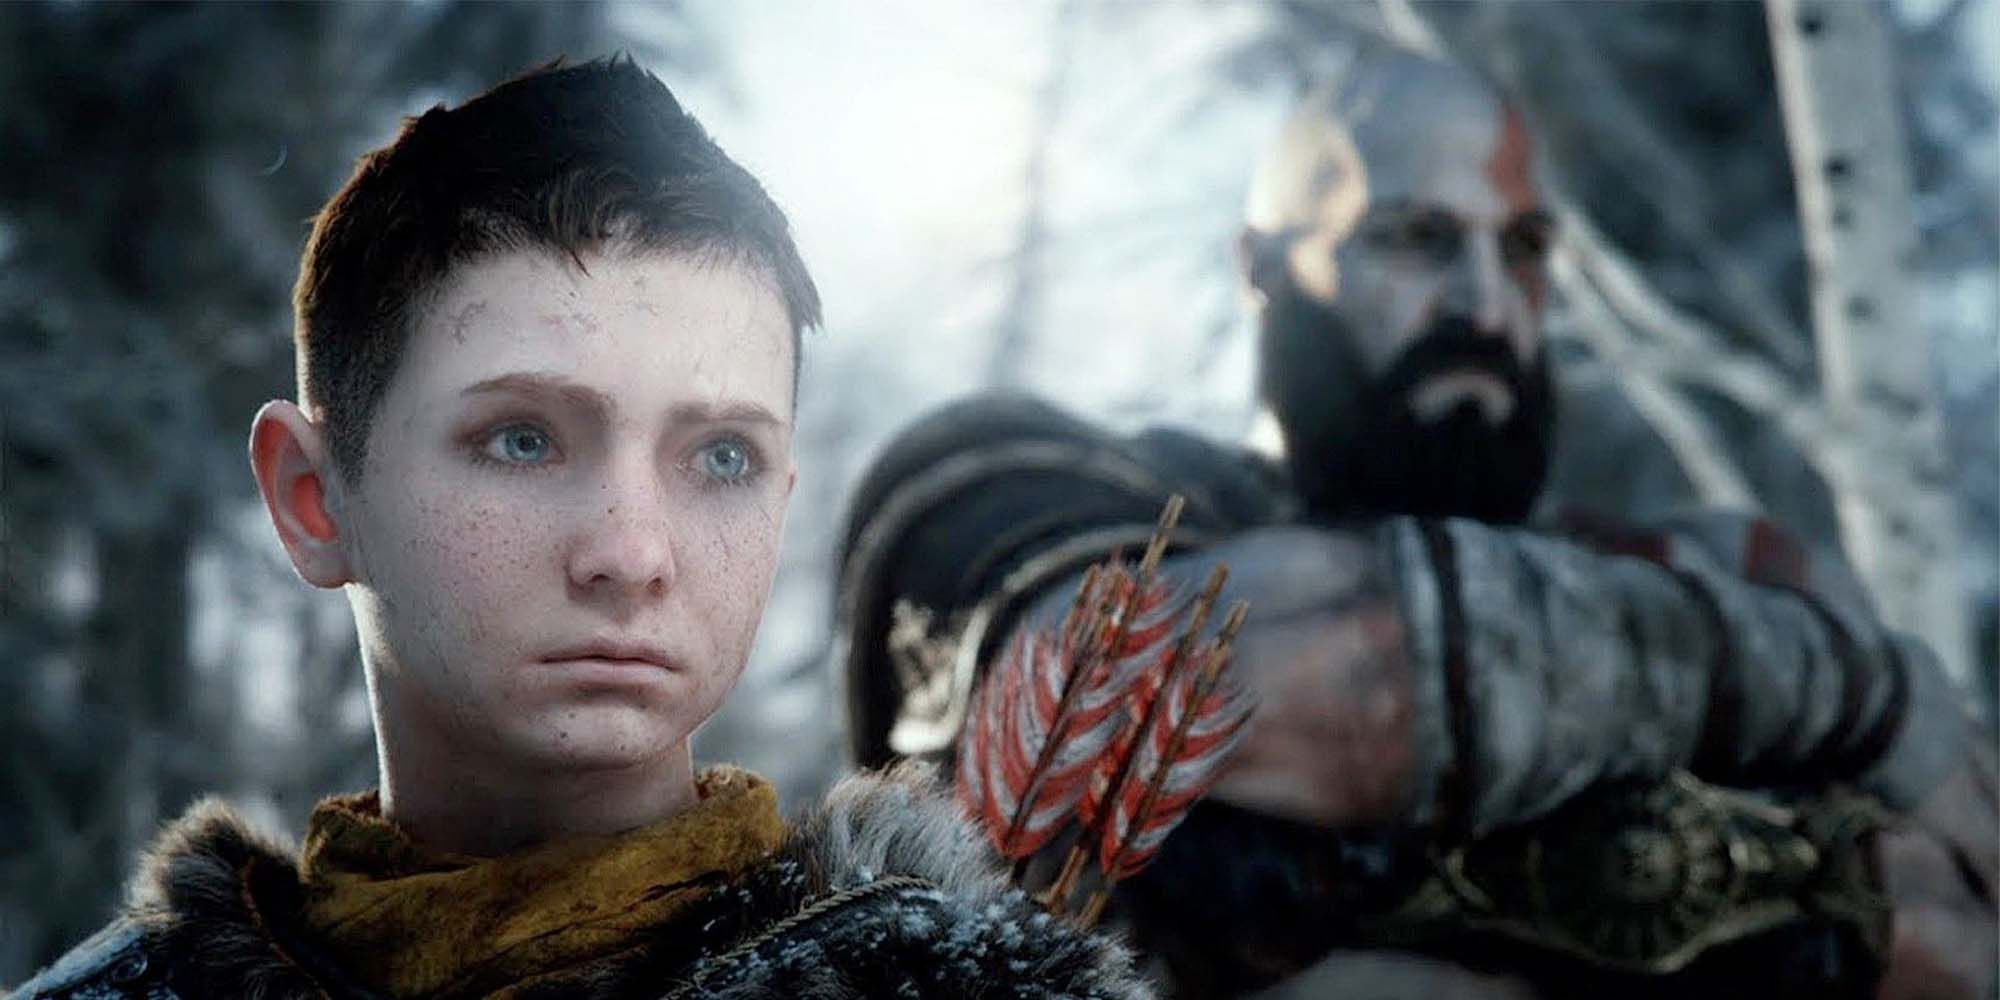 atreus close to the camera and kratos with arms folded behind